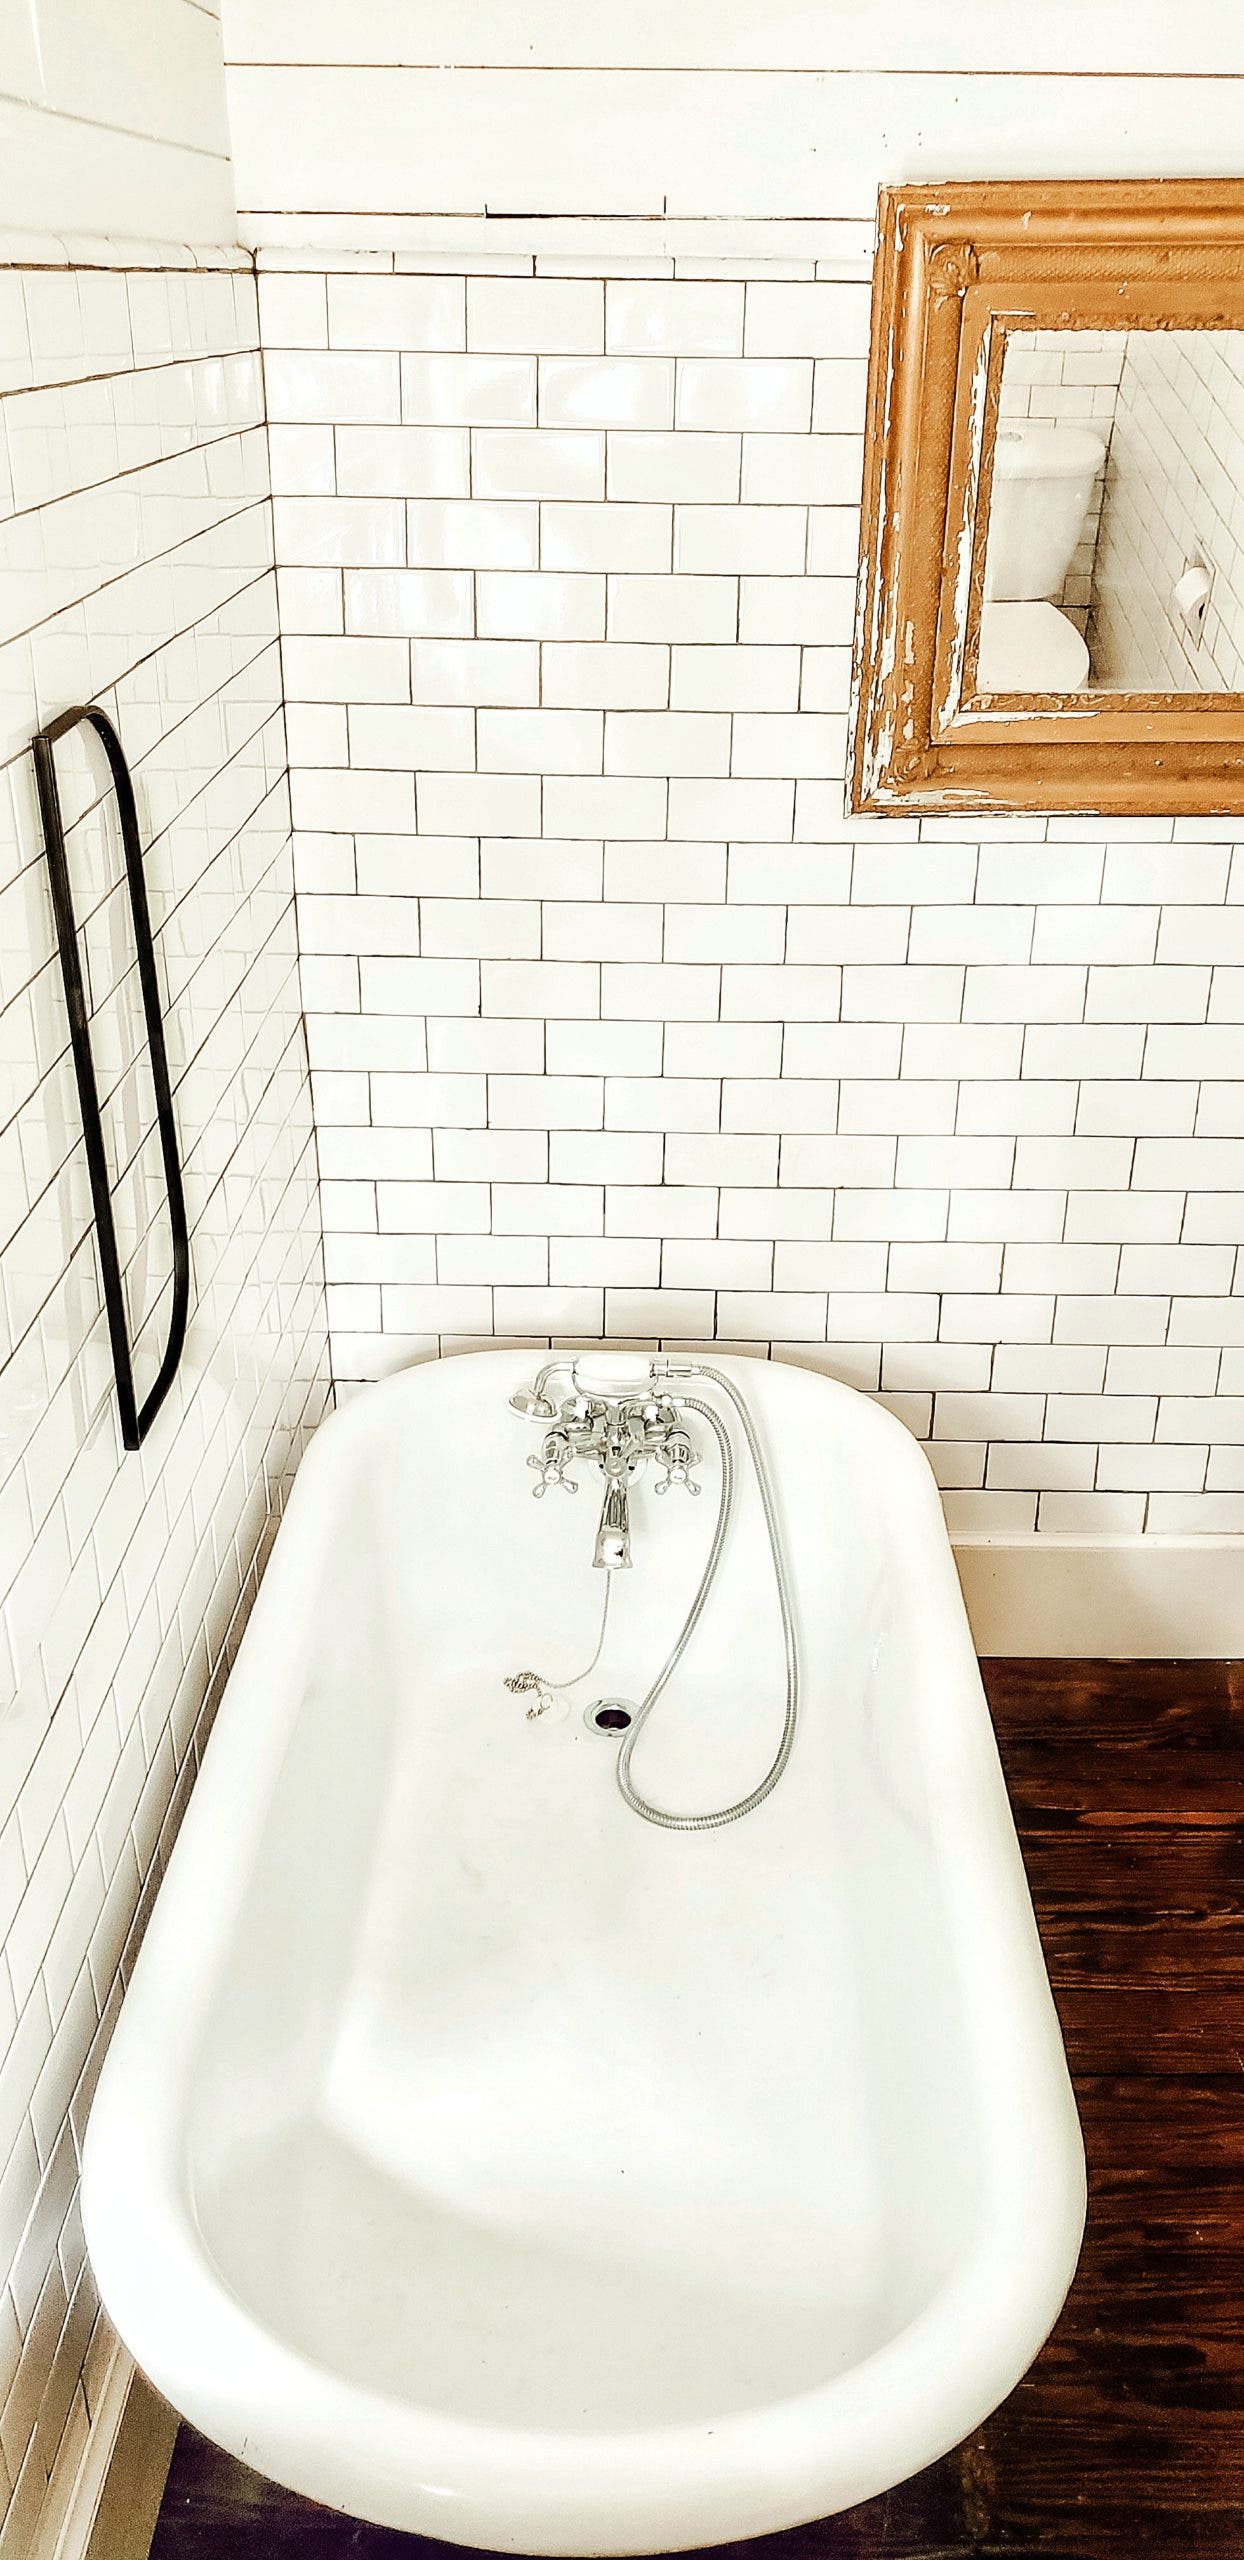 What Do I Need for a Clawfoot Tub?